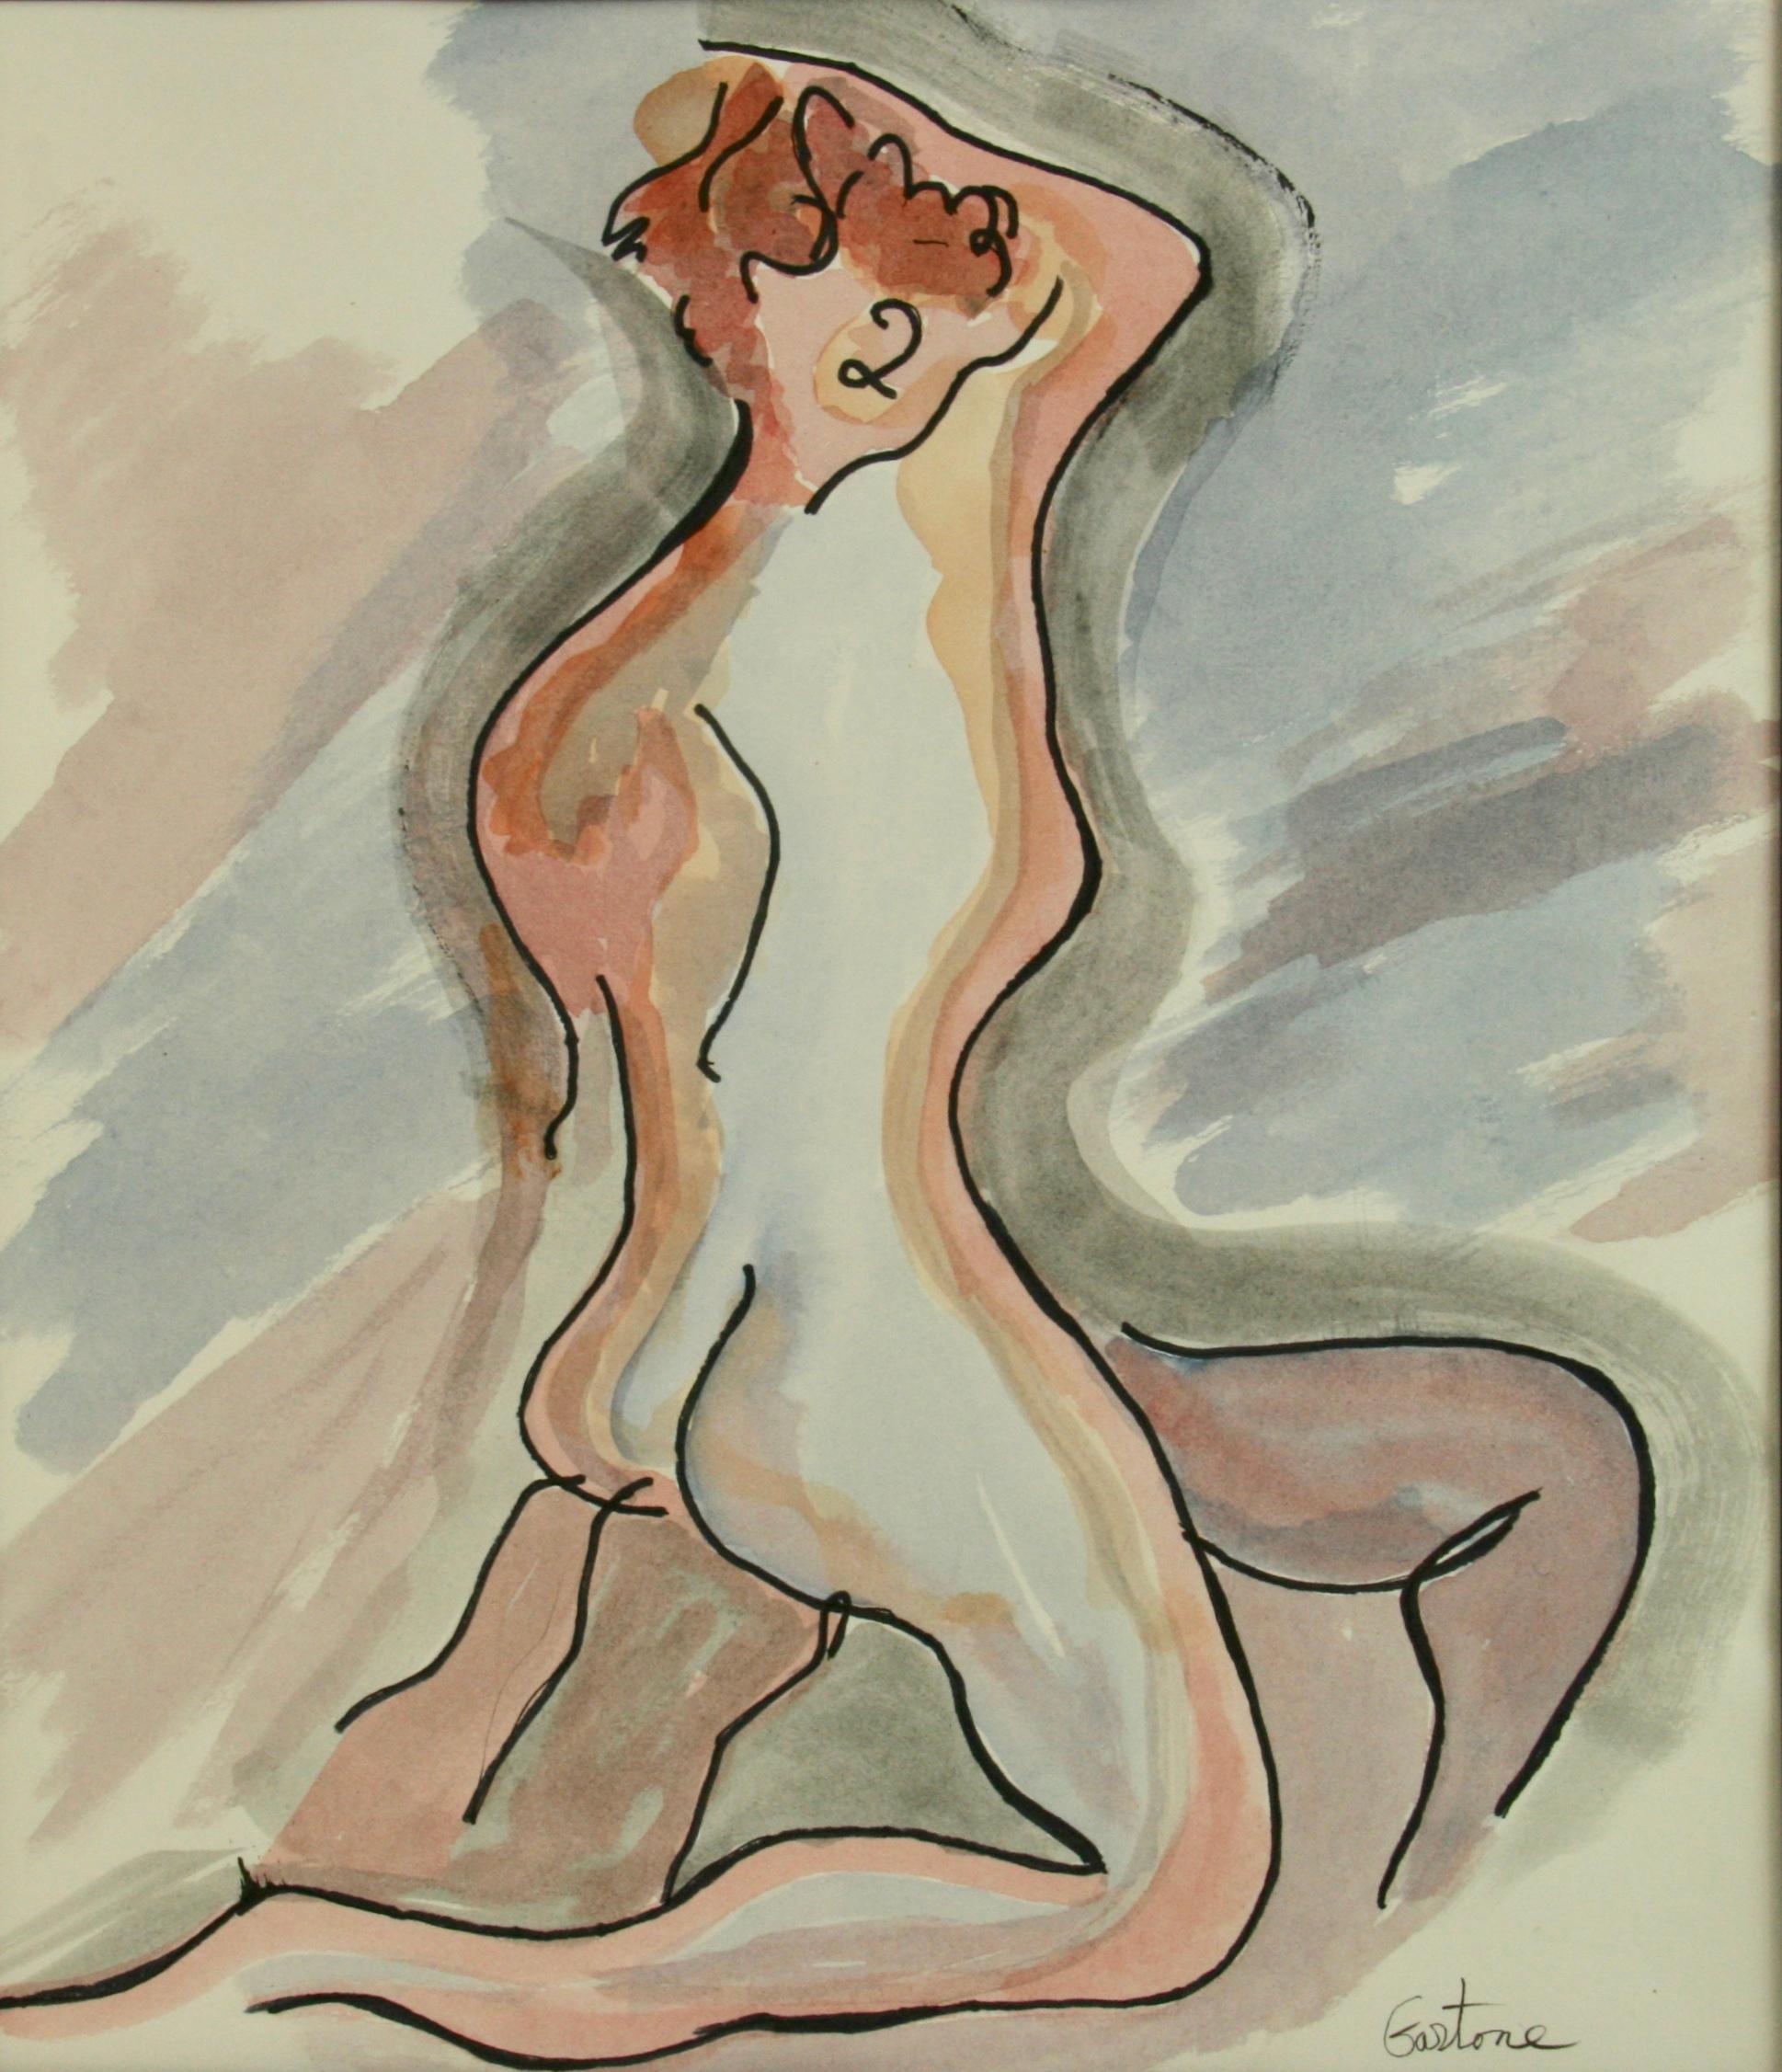 Abstract Gouache Nude - Painting by Gartone